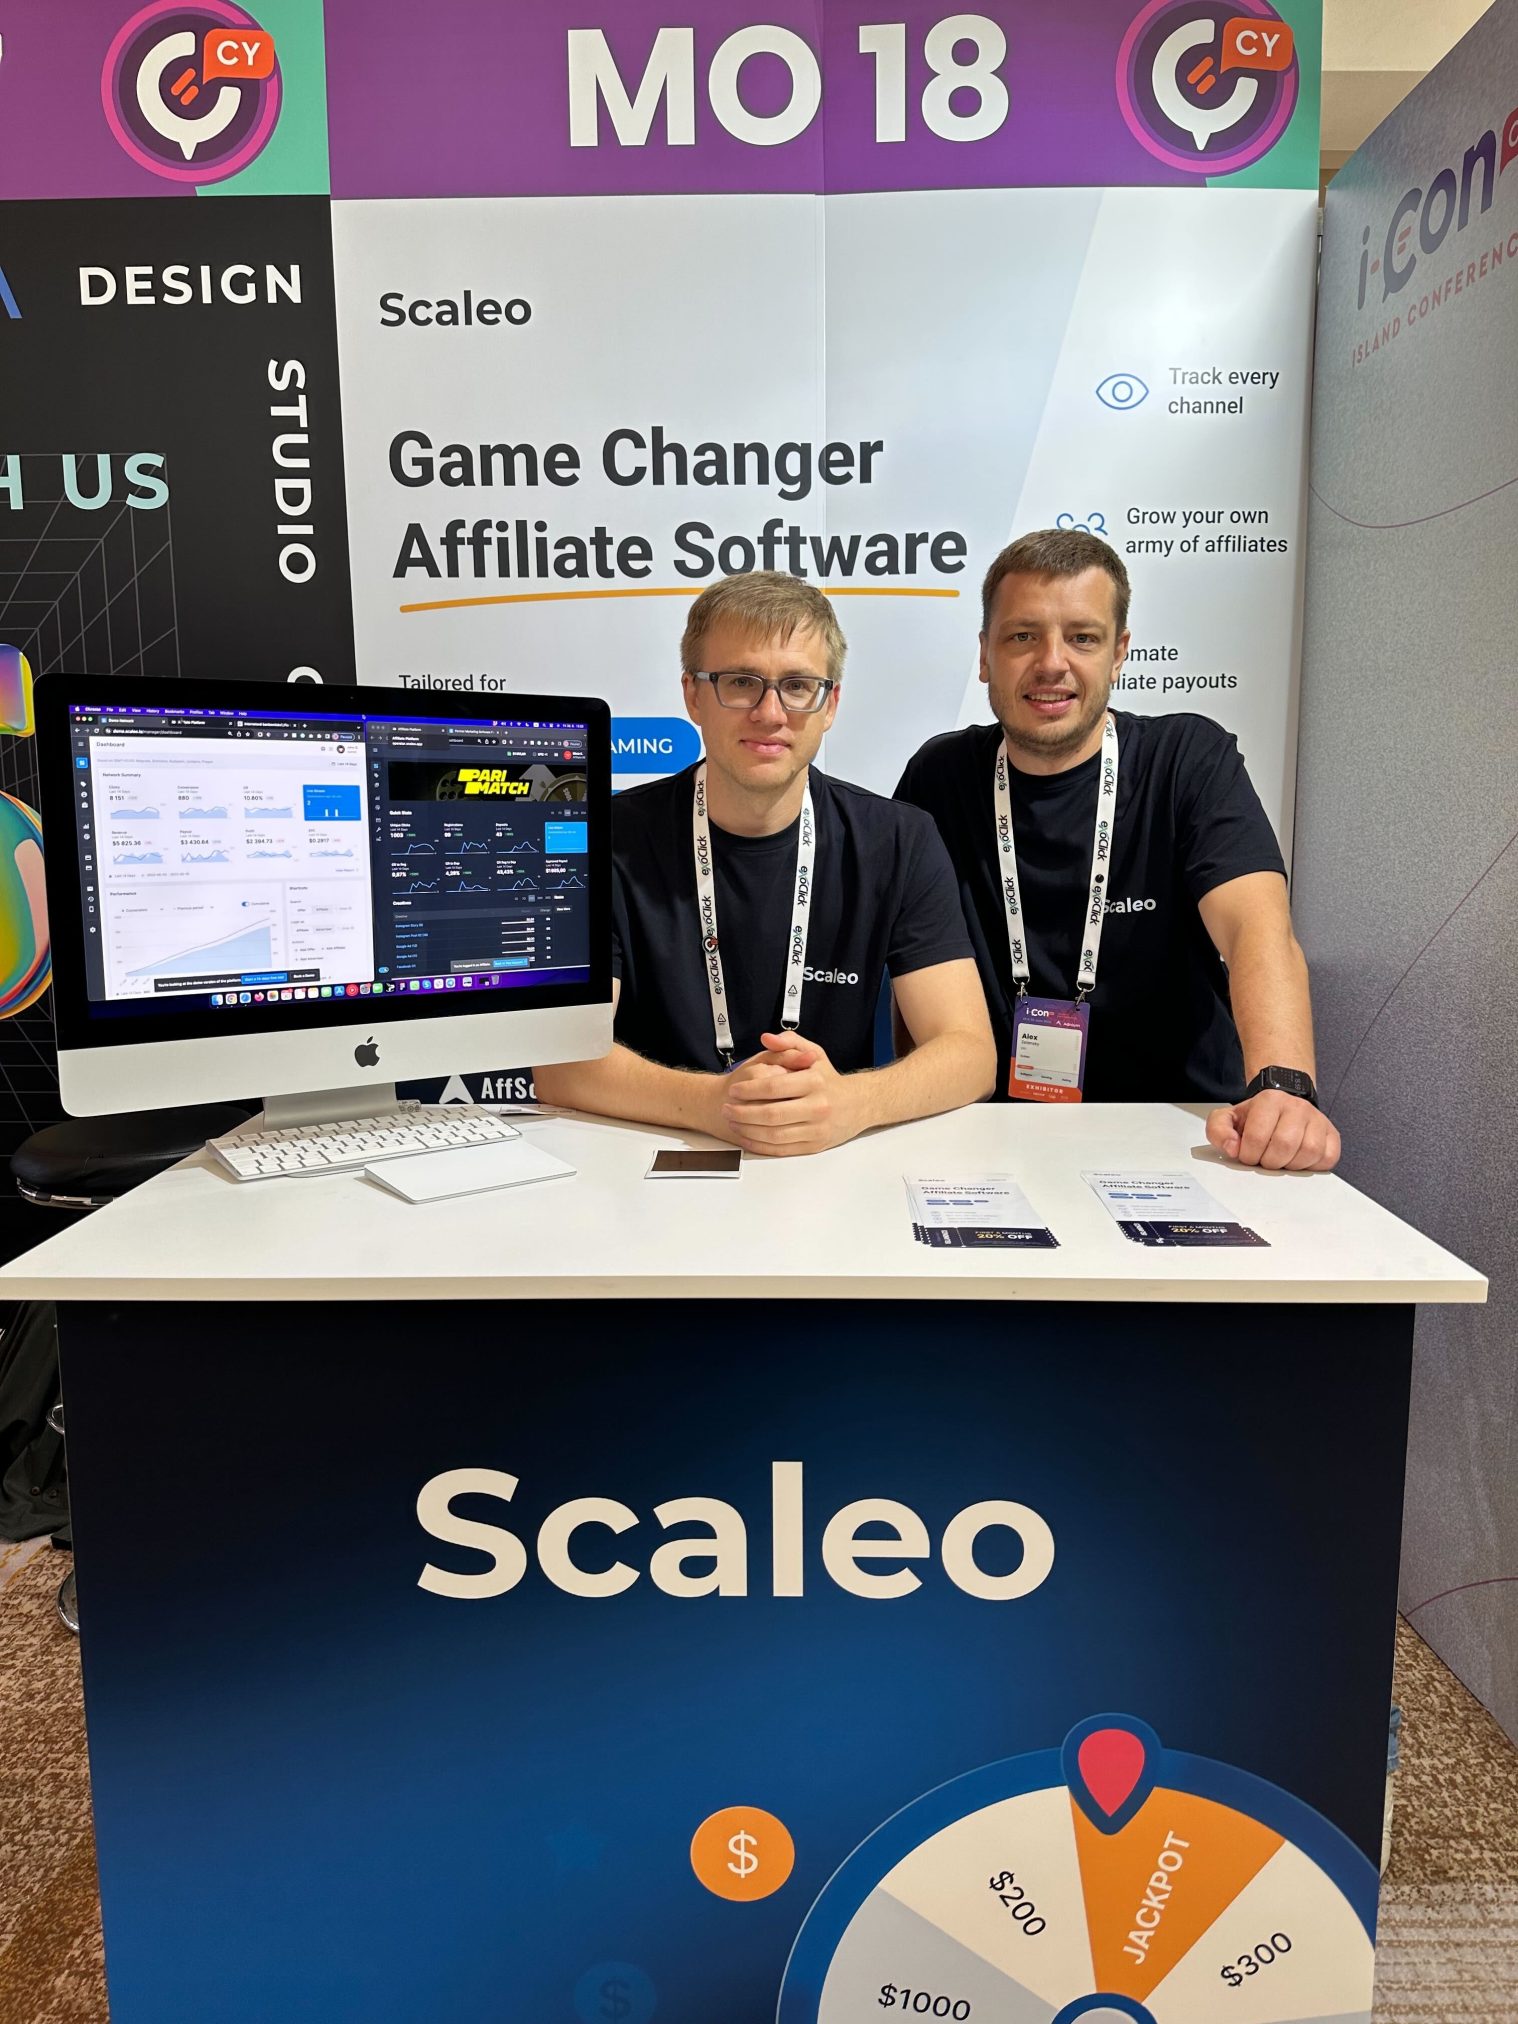 Scaleo Team Has Attended the i-Con Affiliate Conference -